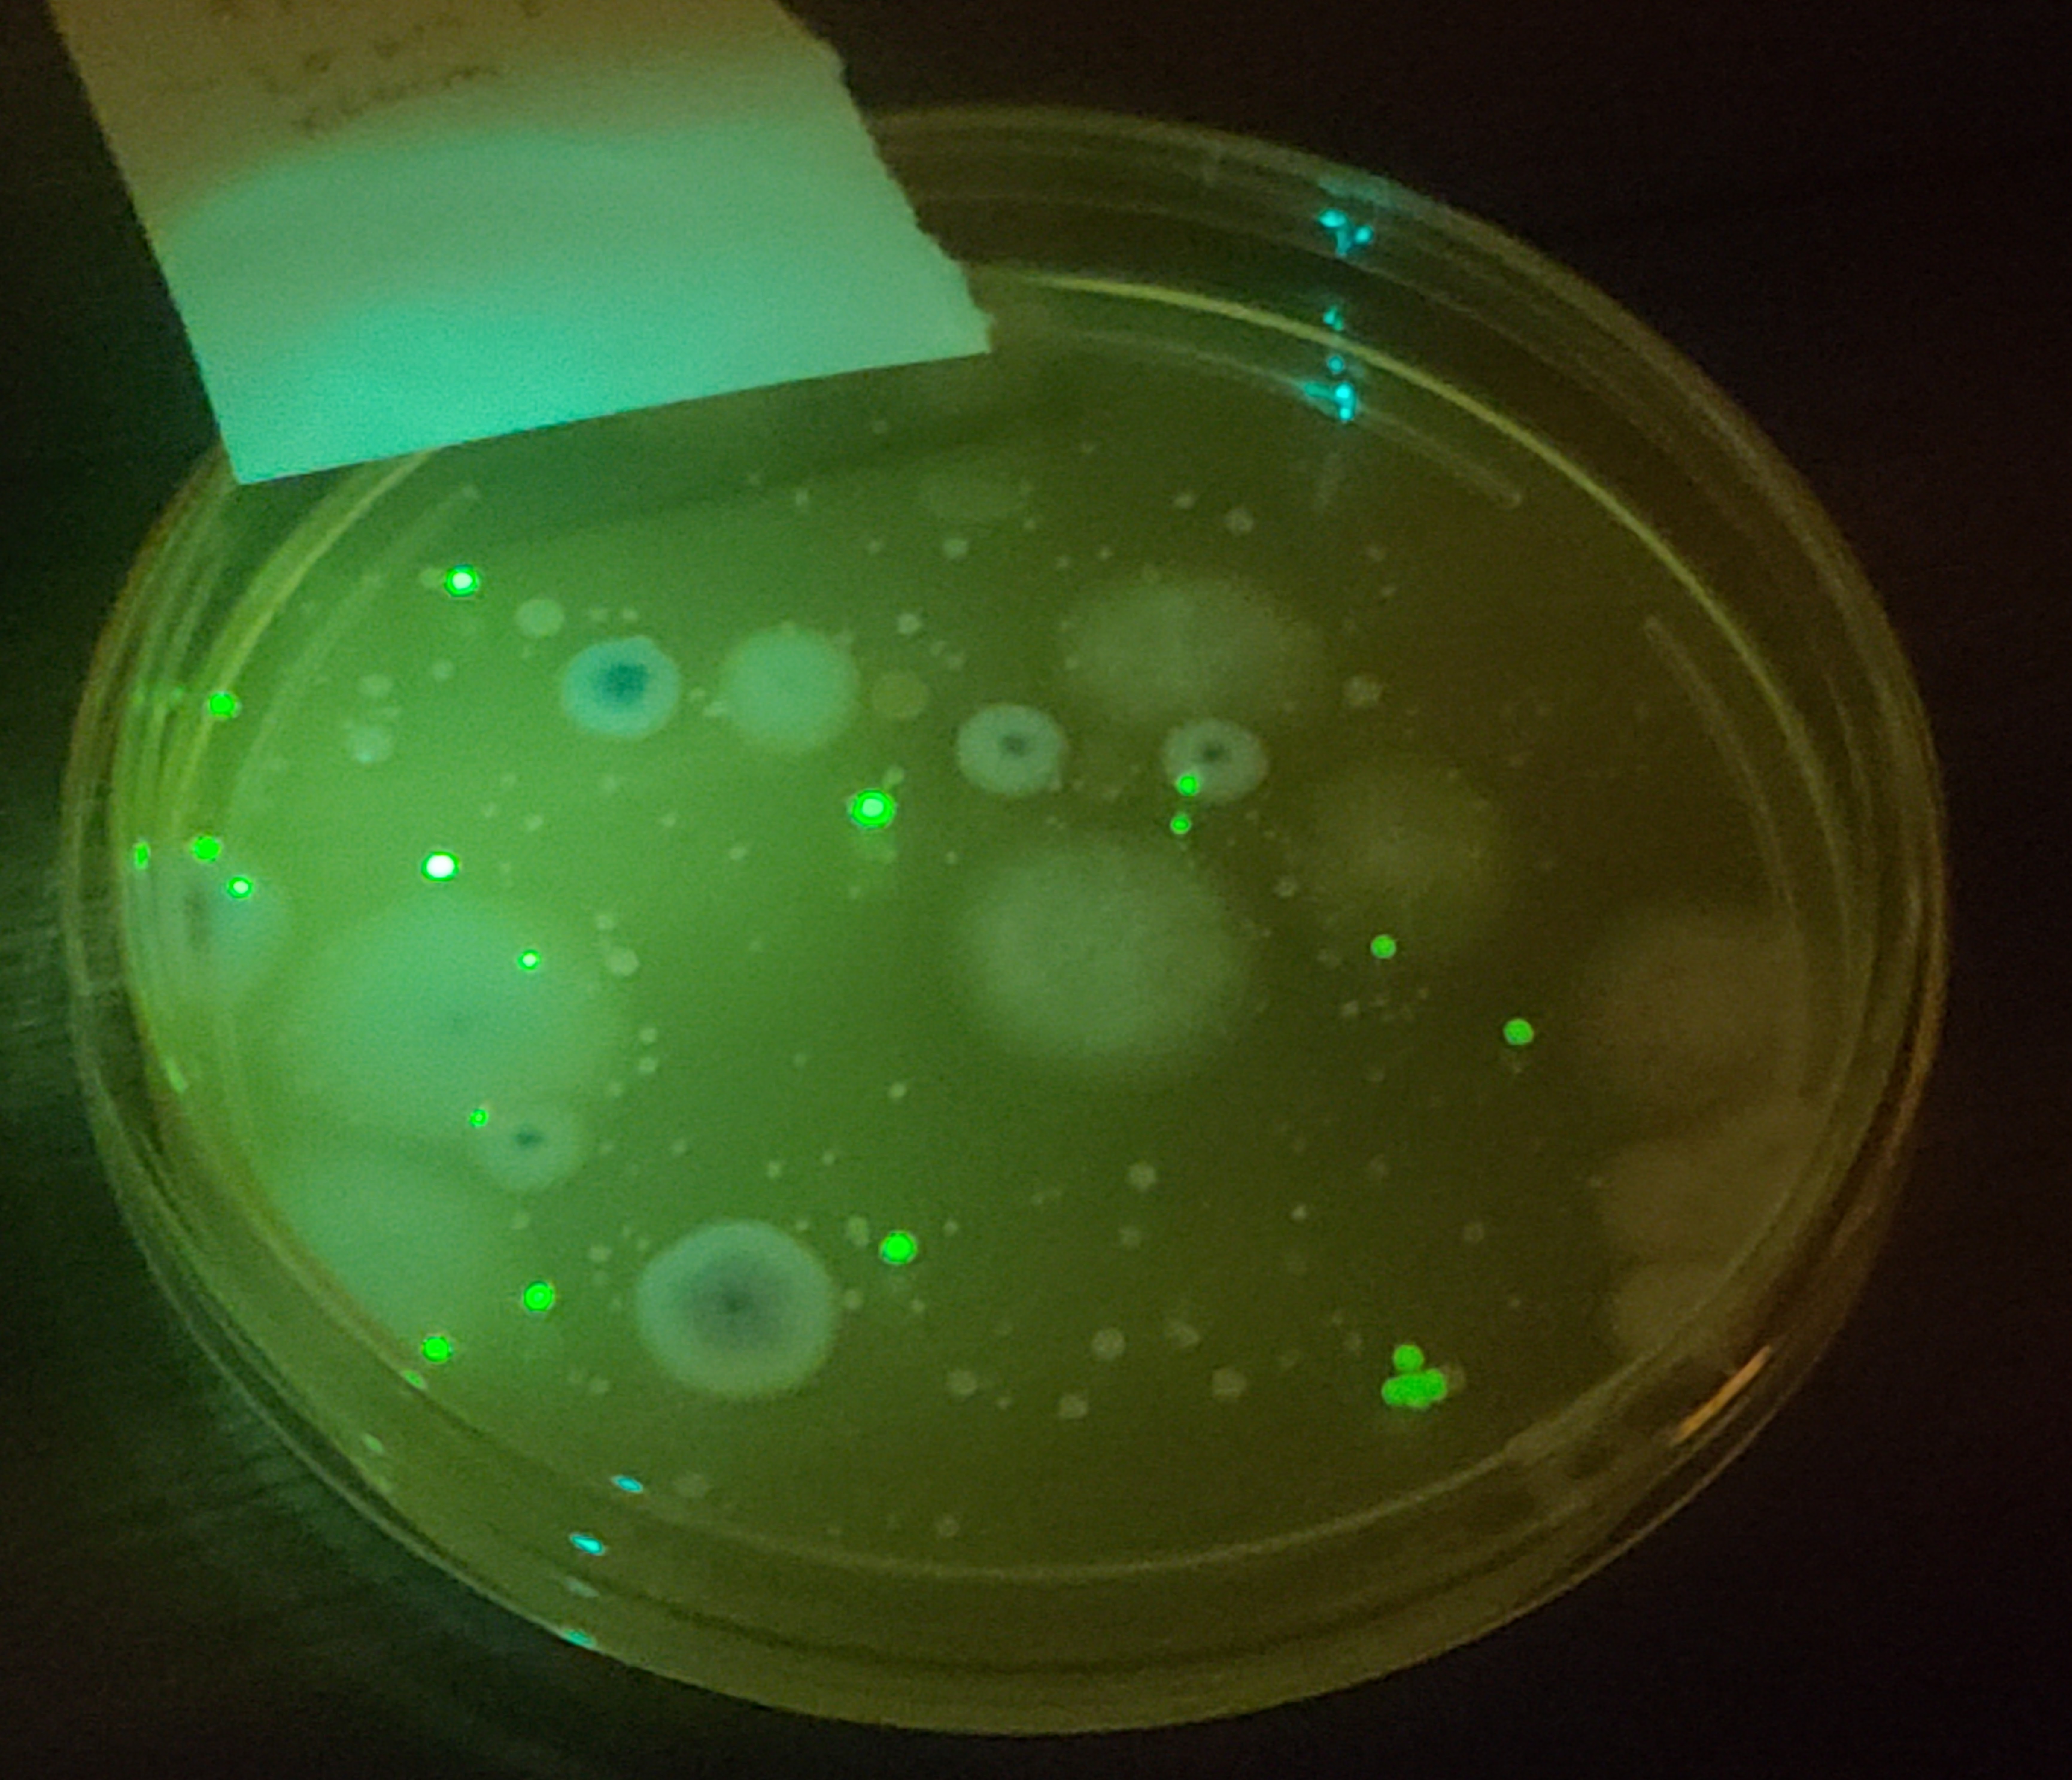 Variant 2 after culturing: Less successful *E. coli* strain produced a small amount of GFP